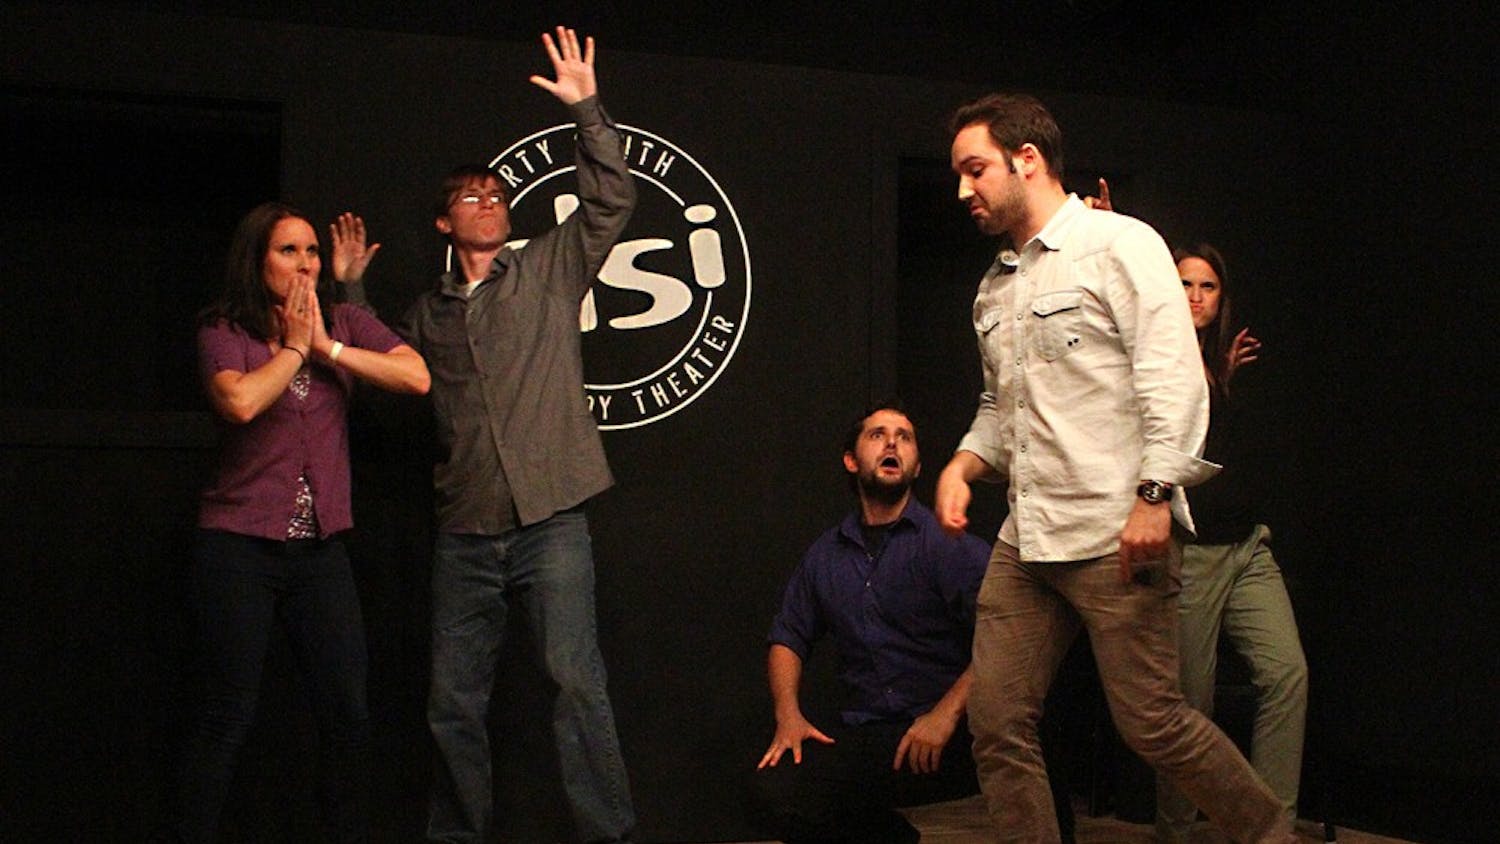 Starting Block, a showcase of incubator teams, performed at DSI Comedy on Tuesday night at the new Franklin Street location. 